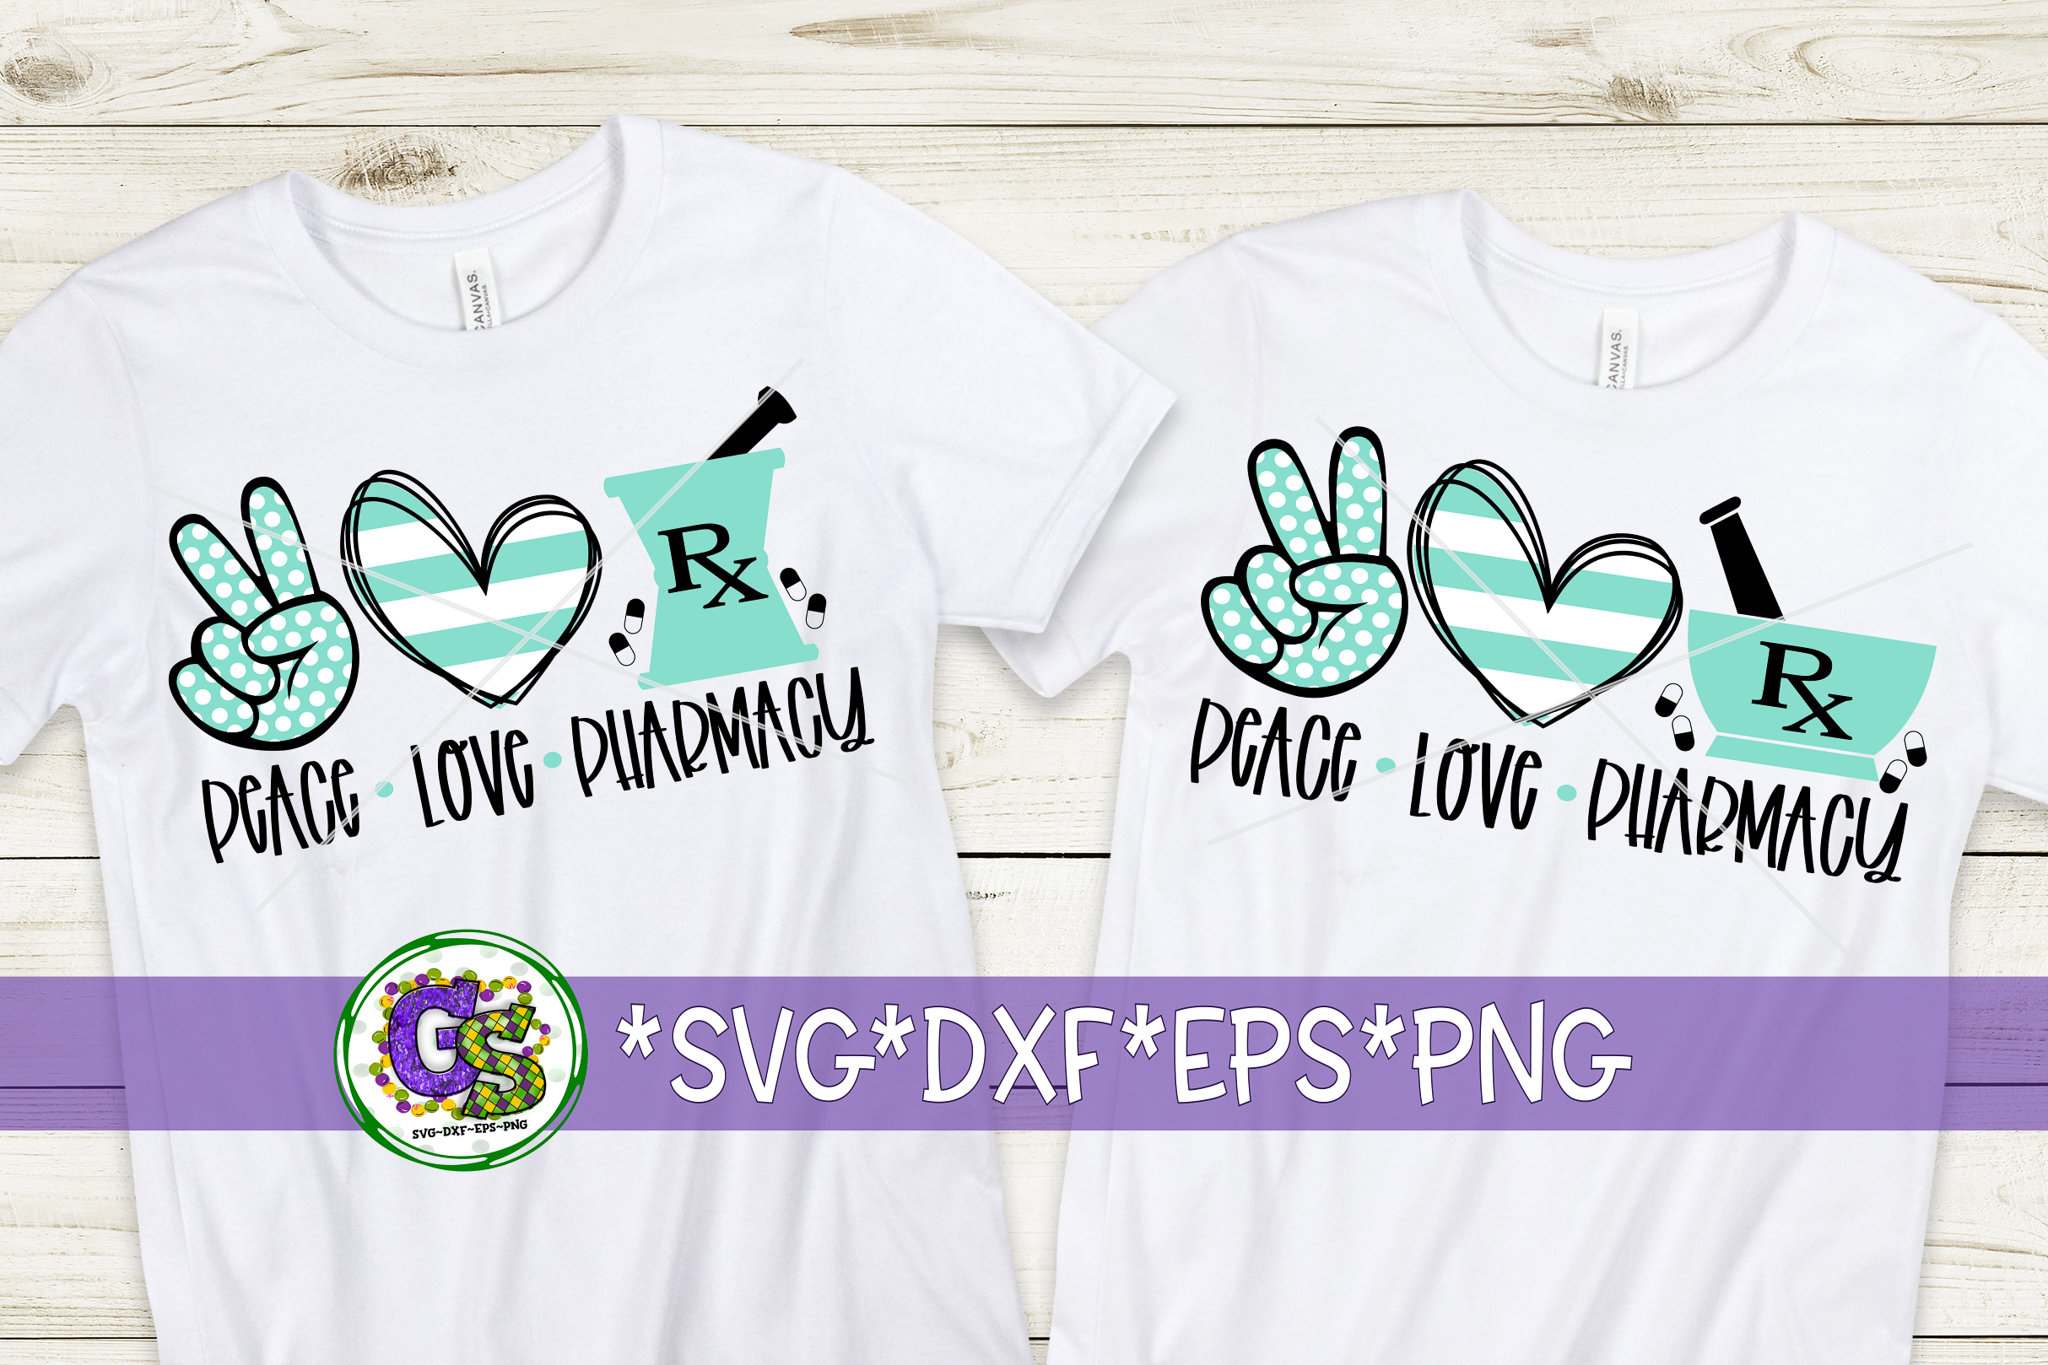 Download Pharmacy SVG | Peace Love Pharmacy SVG DXF EPS PNG (539097 ...